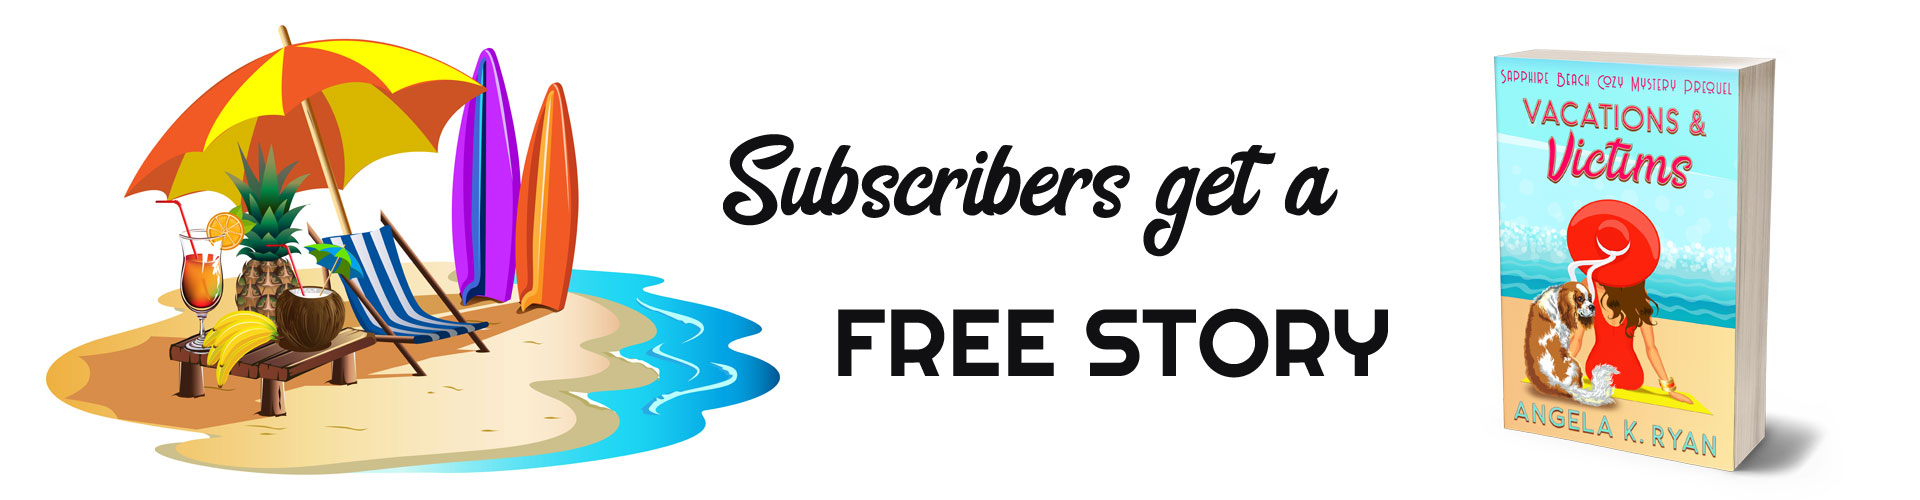 Subscribers get a free story